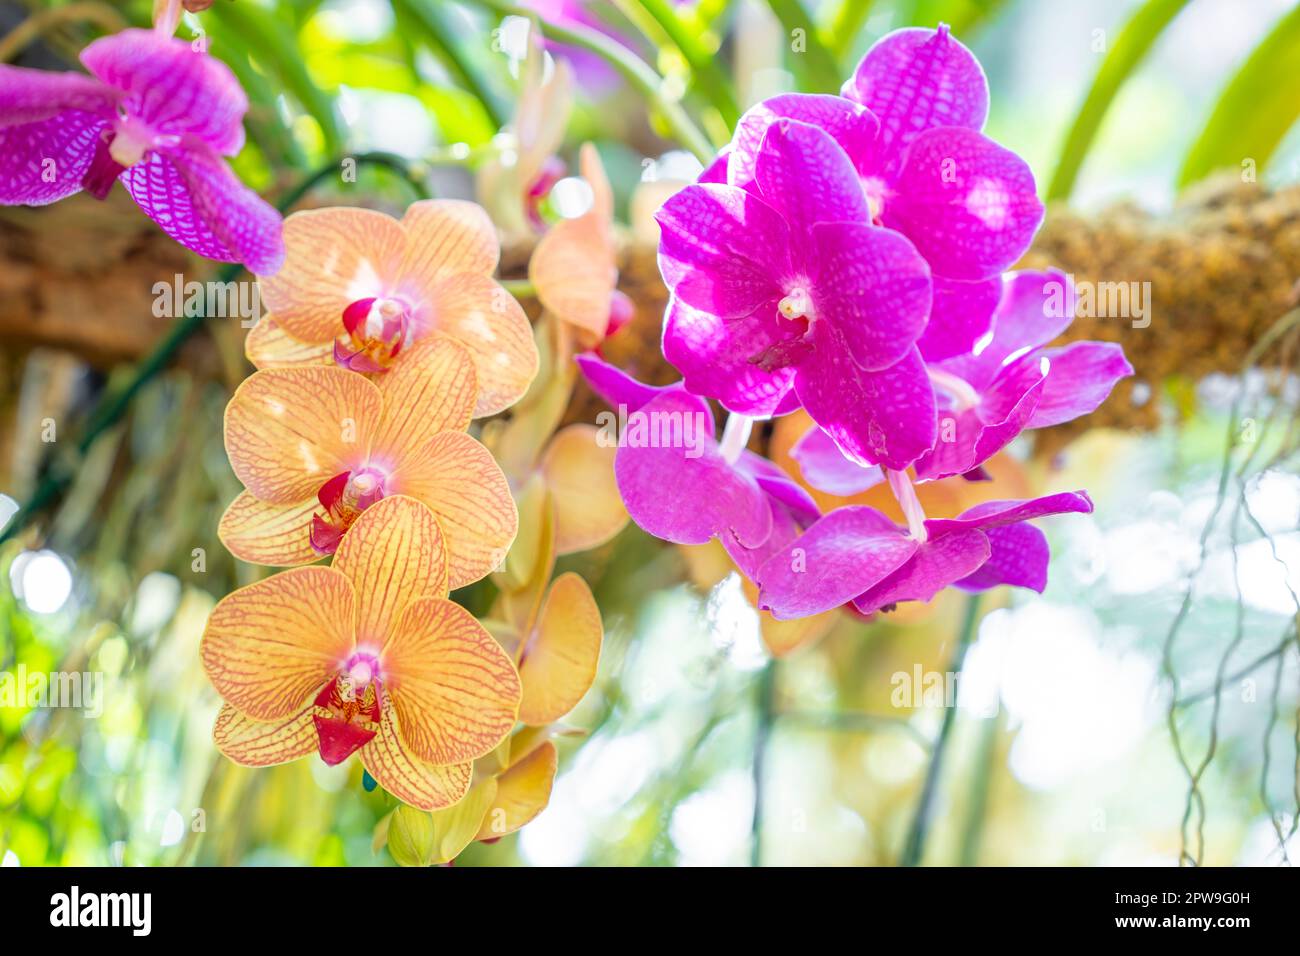 Purple orchids, Ascocenda, Vanda hybrids blooming in orchid house in bright sunlight and green leaves blur background. Stock Photo